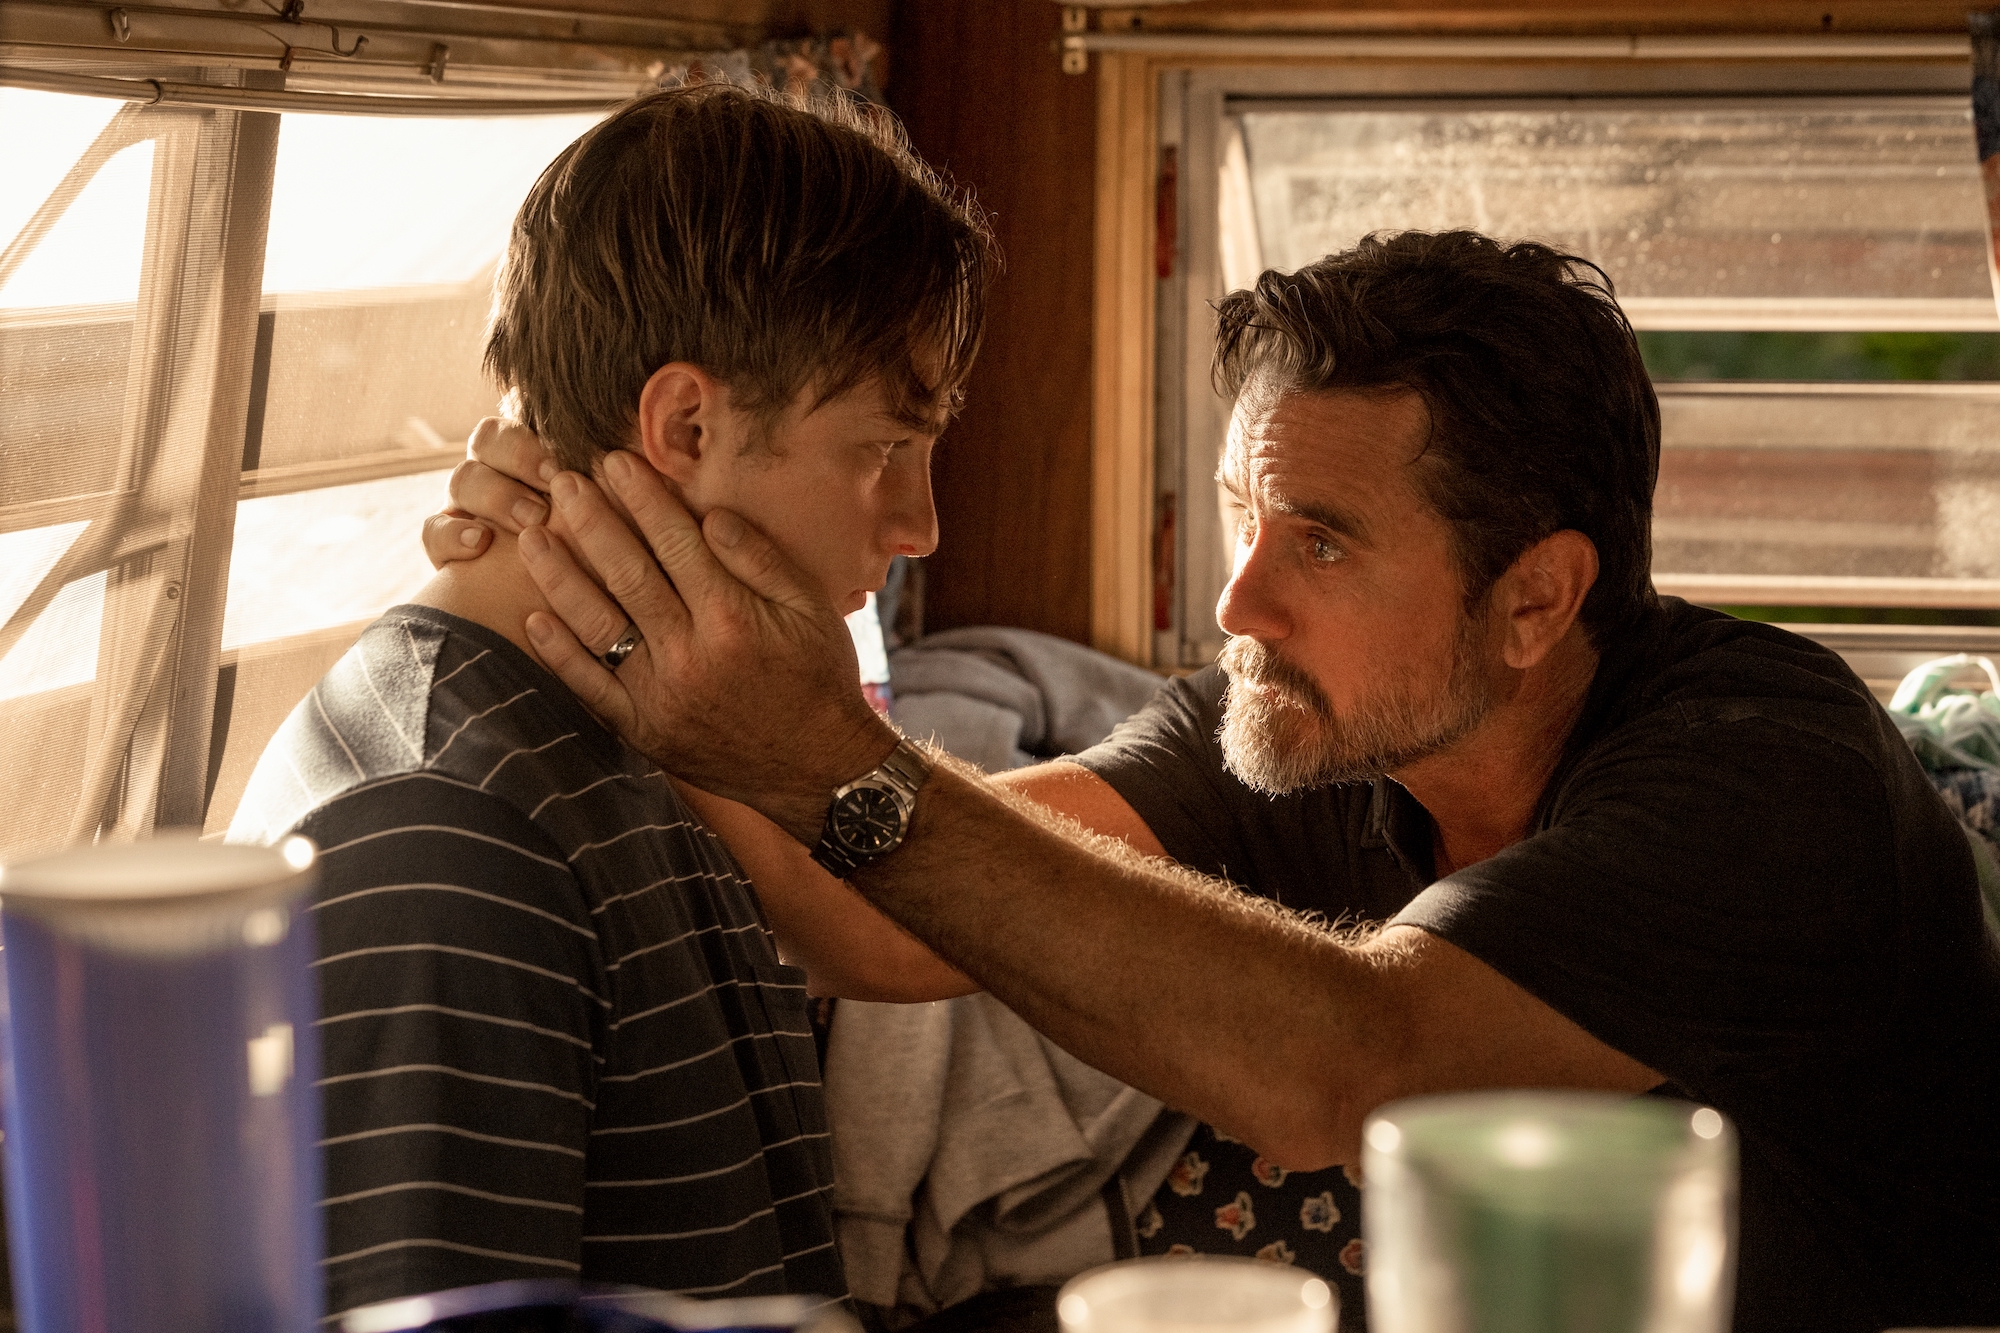 DREW STARKEY as RAFE and CHARLES ESTEN as WARD CAMERON in 'Outer Banks' Season 2